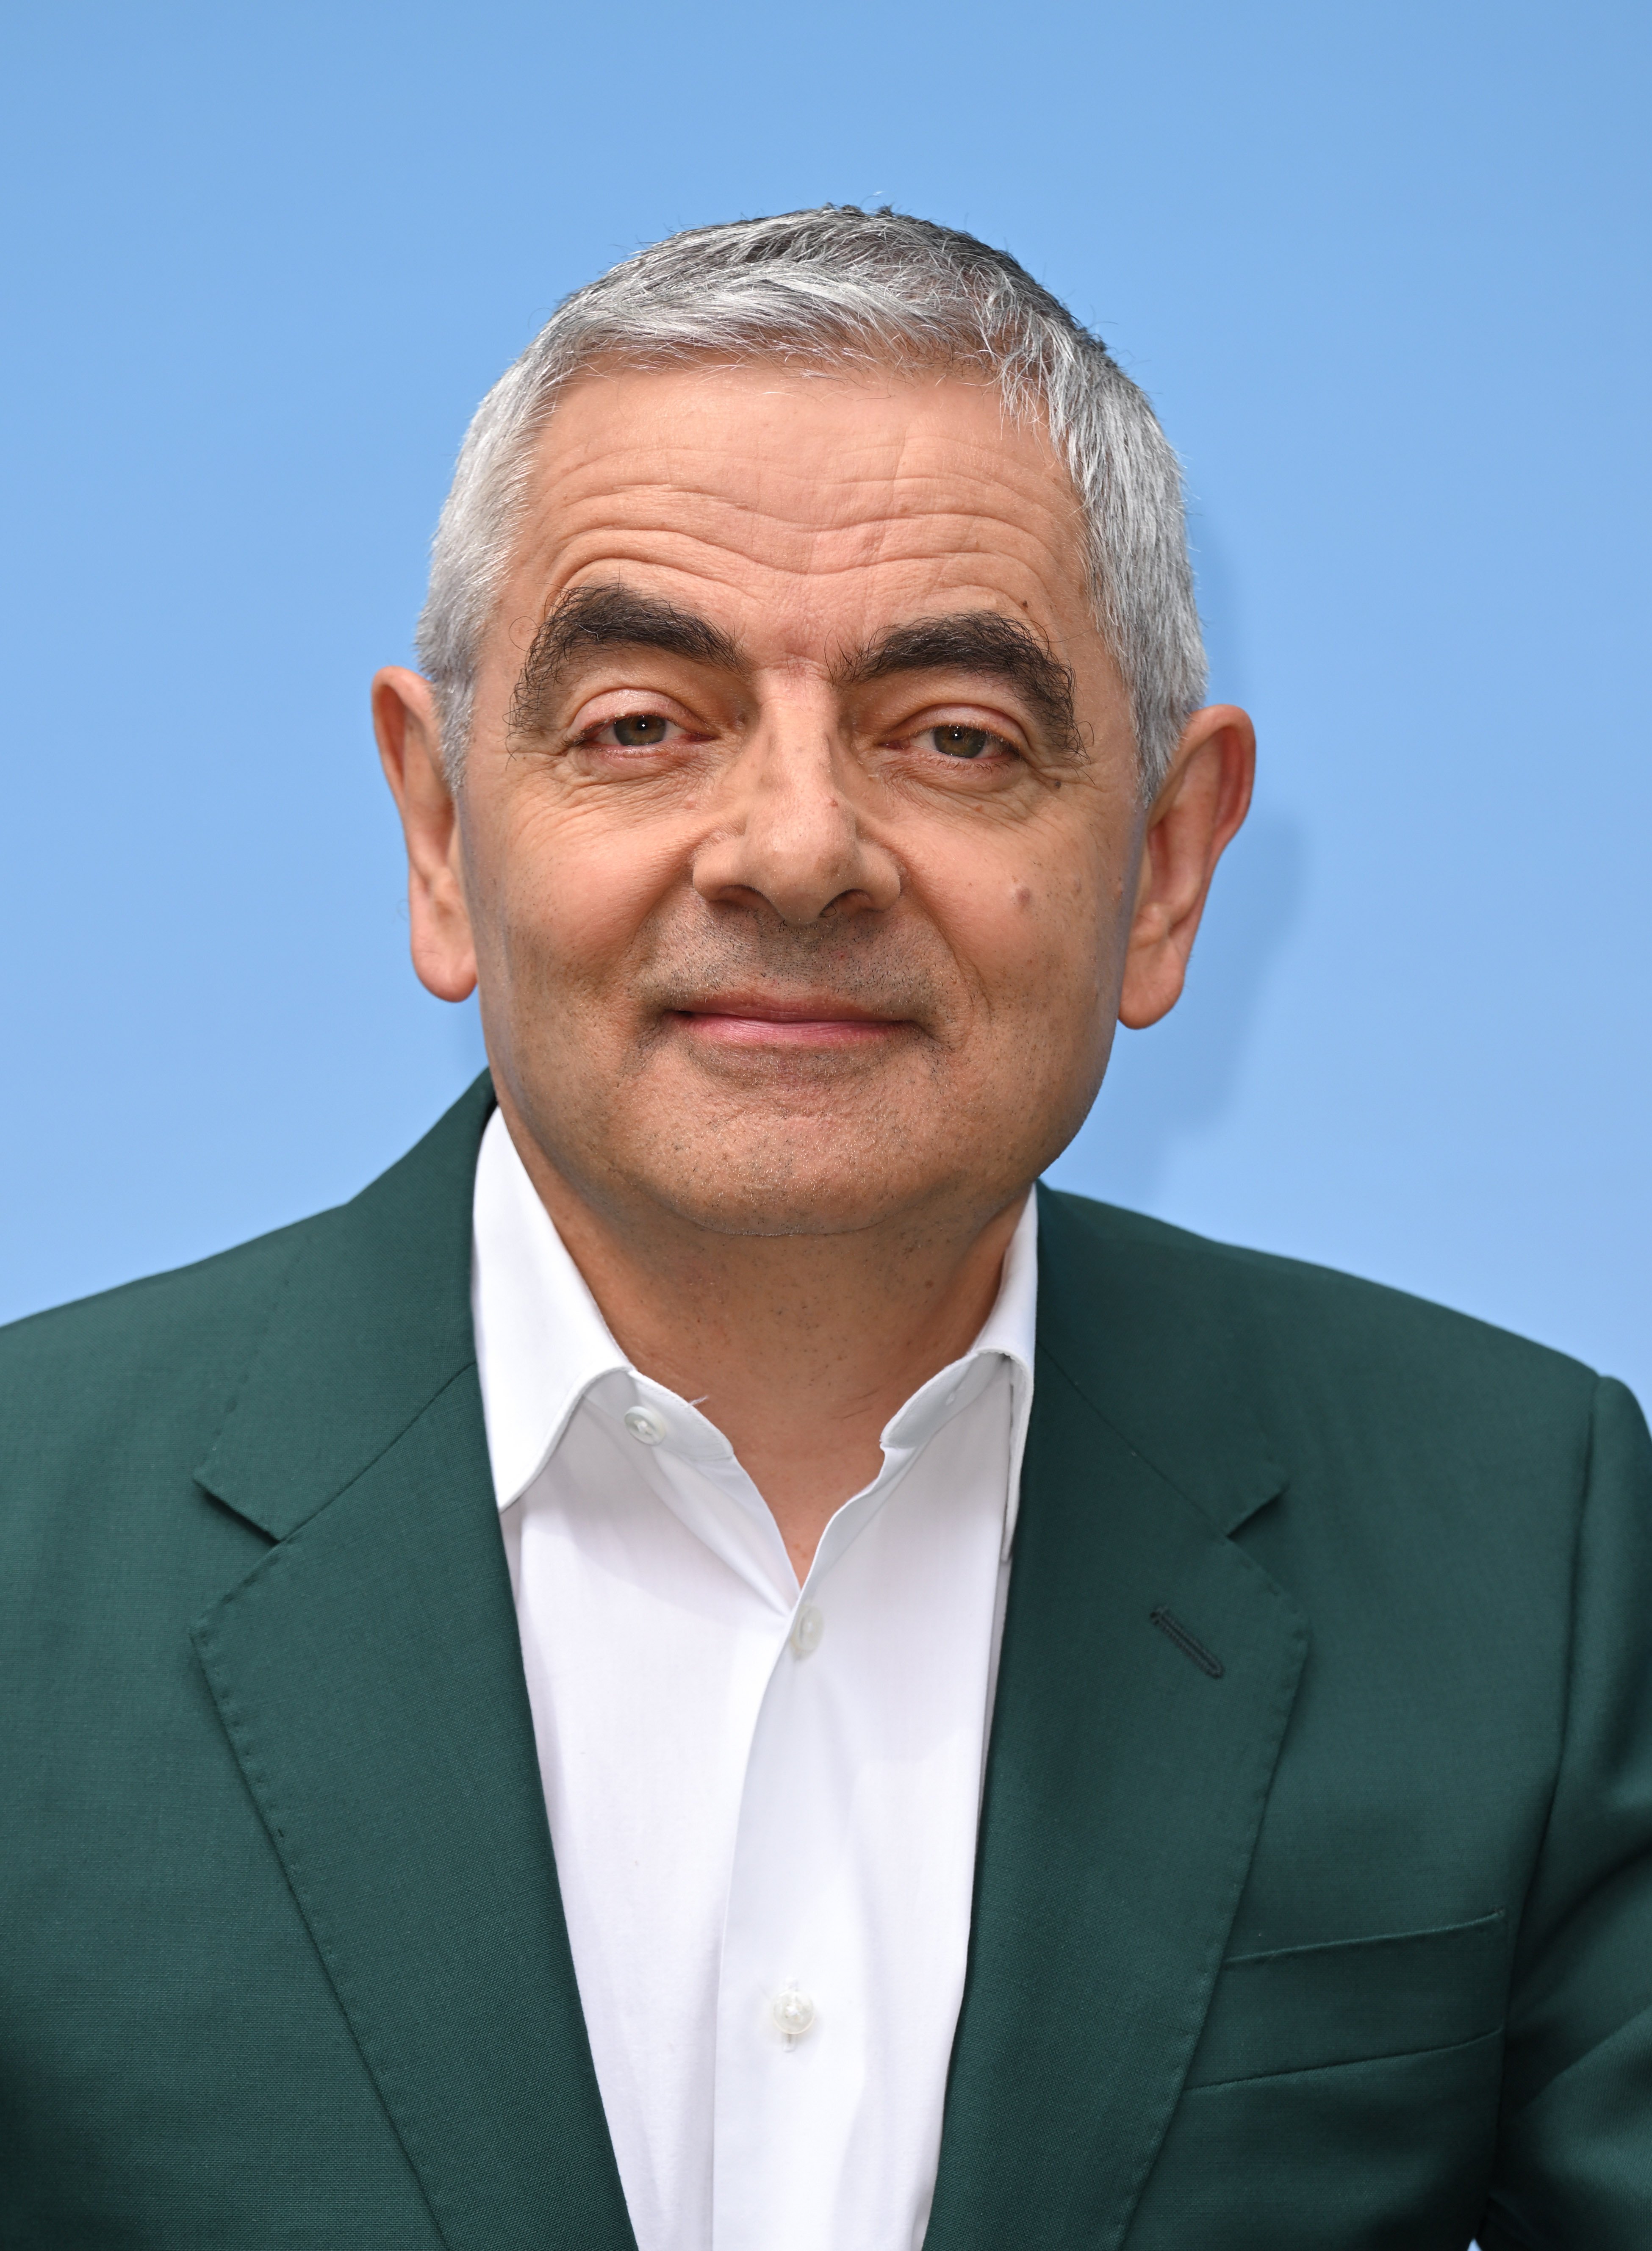 Rowan Atkinson attends the UK Premiere of "Man Vs Bee" on June 19, 2022, in London, England. I Source: Getty Images